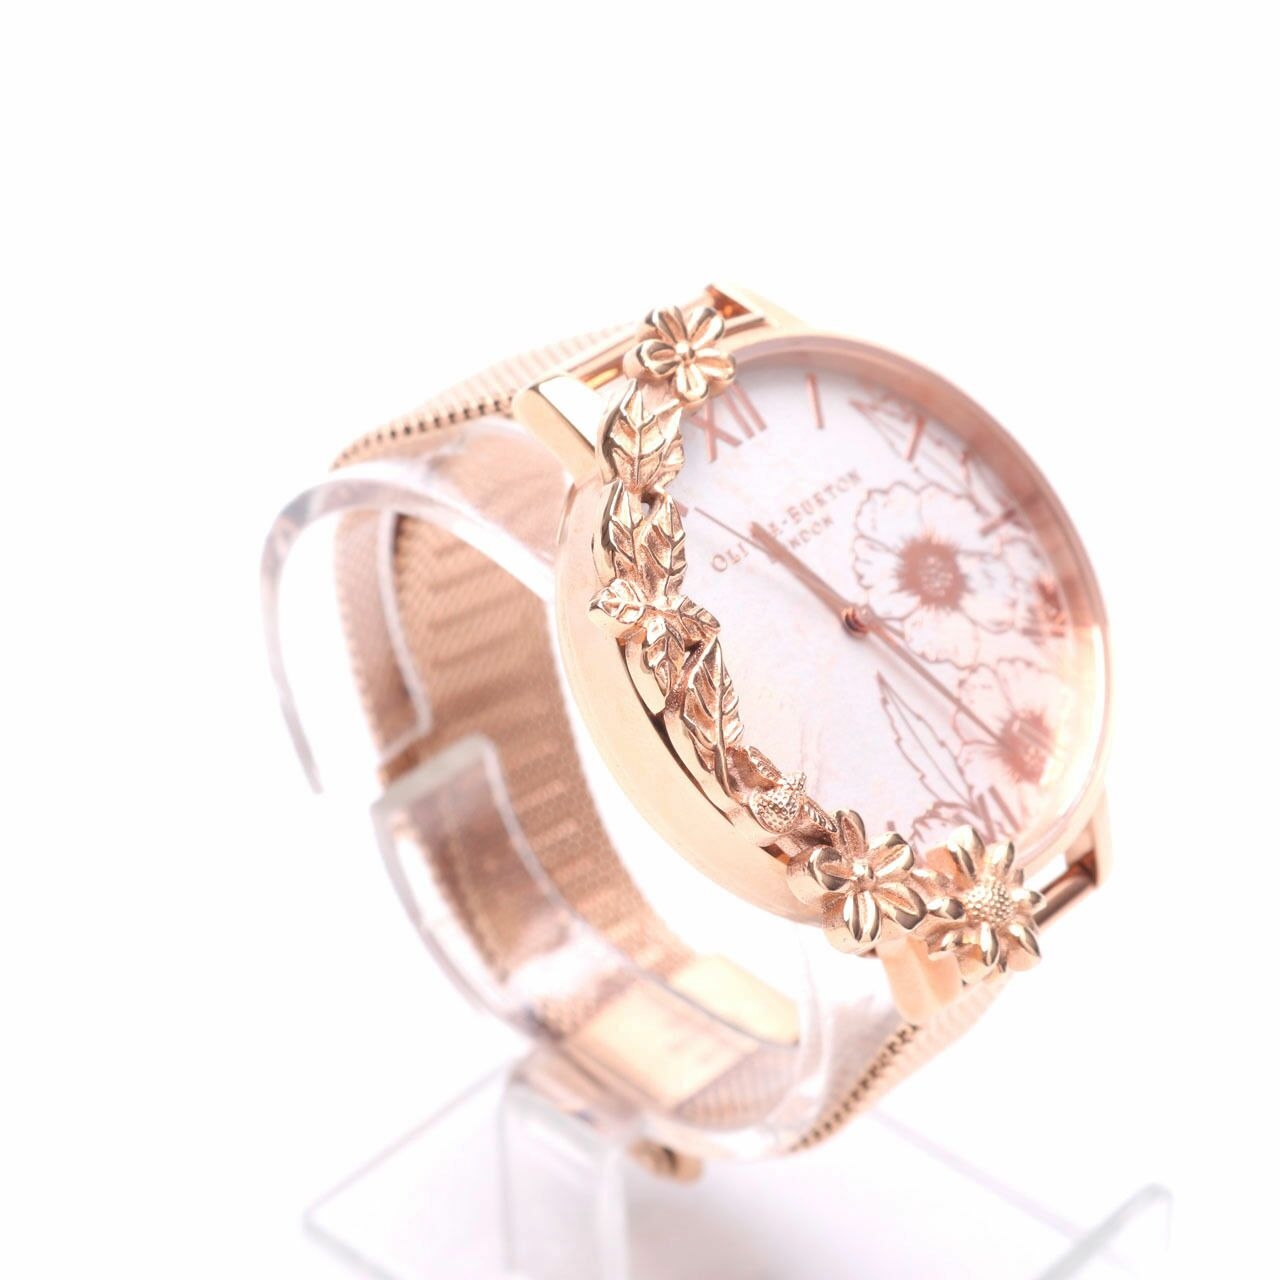 Olivia Burton Abstract Florals Blush and Rose Gold Watch 